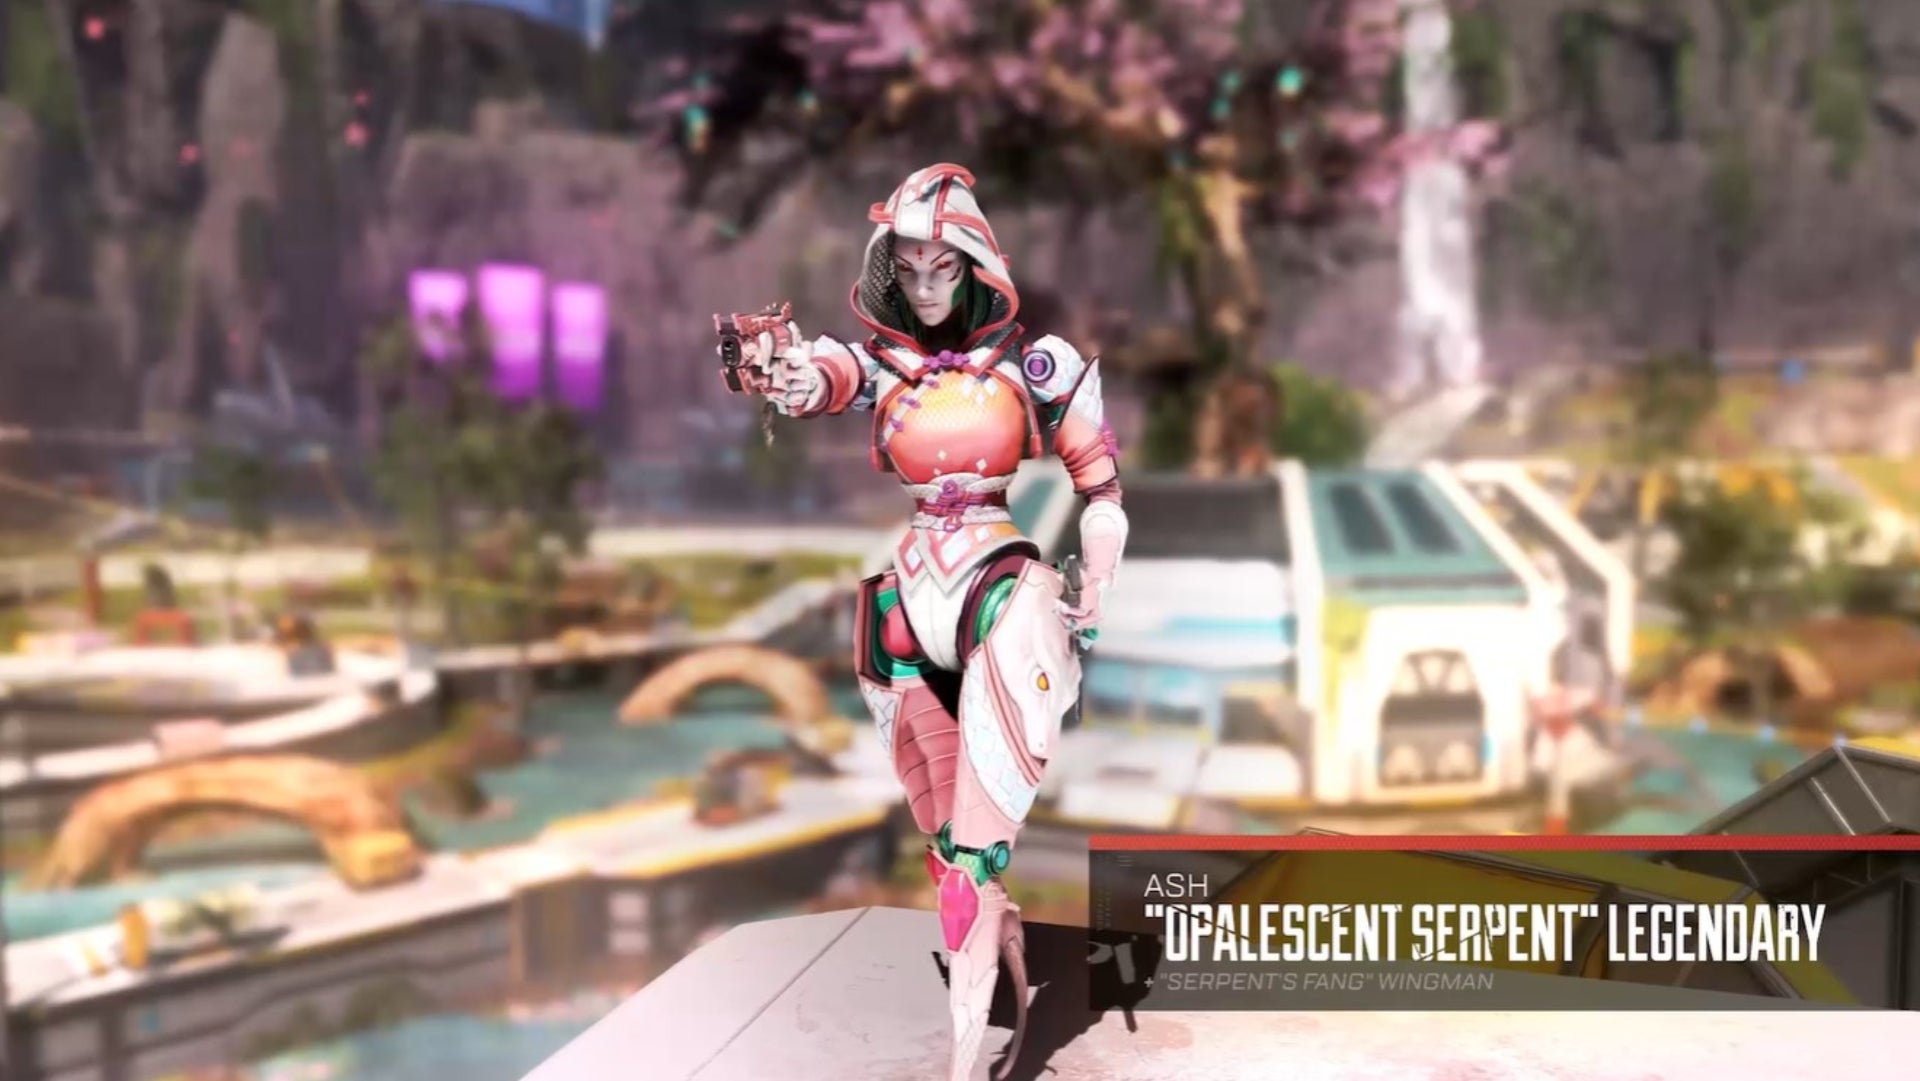 Apex Legends, Official Respawn image of Ash in their Opalescent Serpent Skin